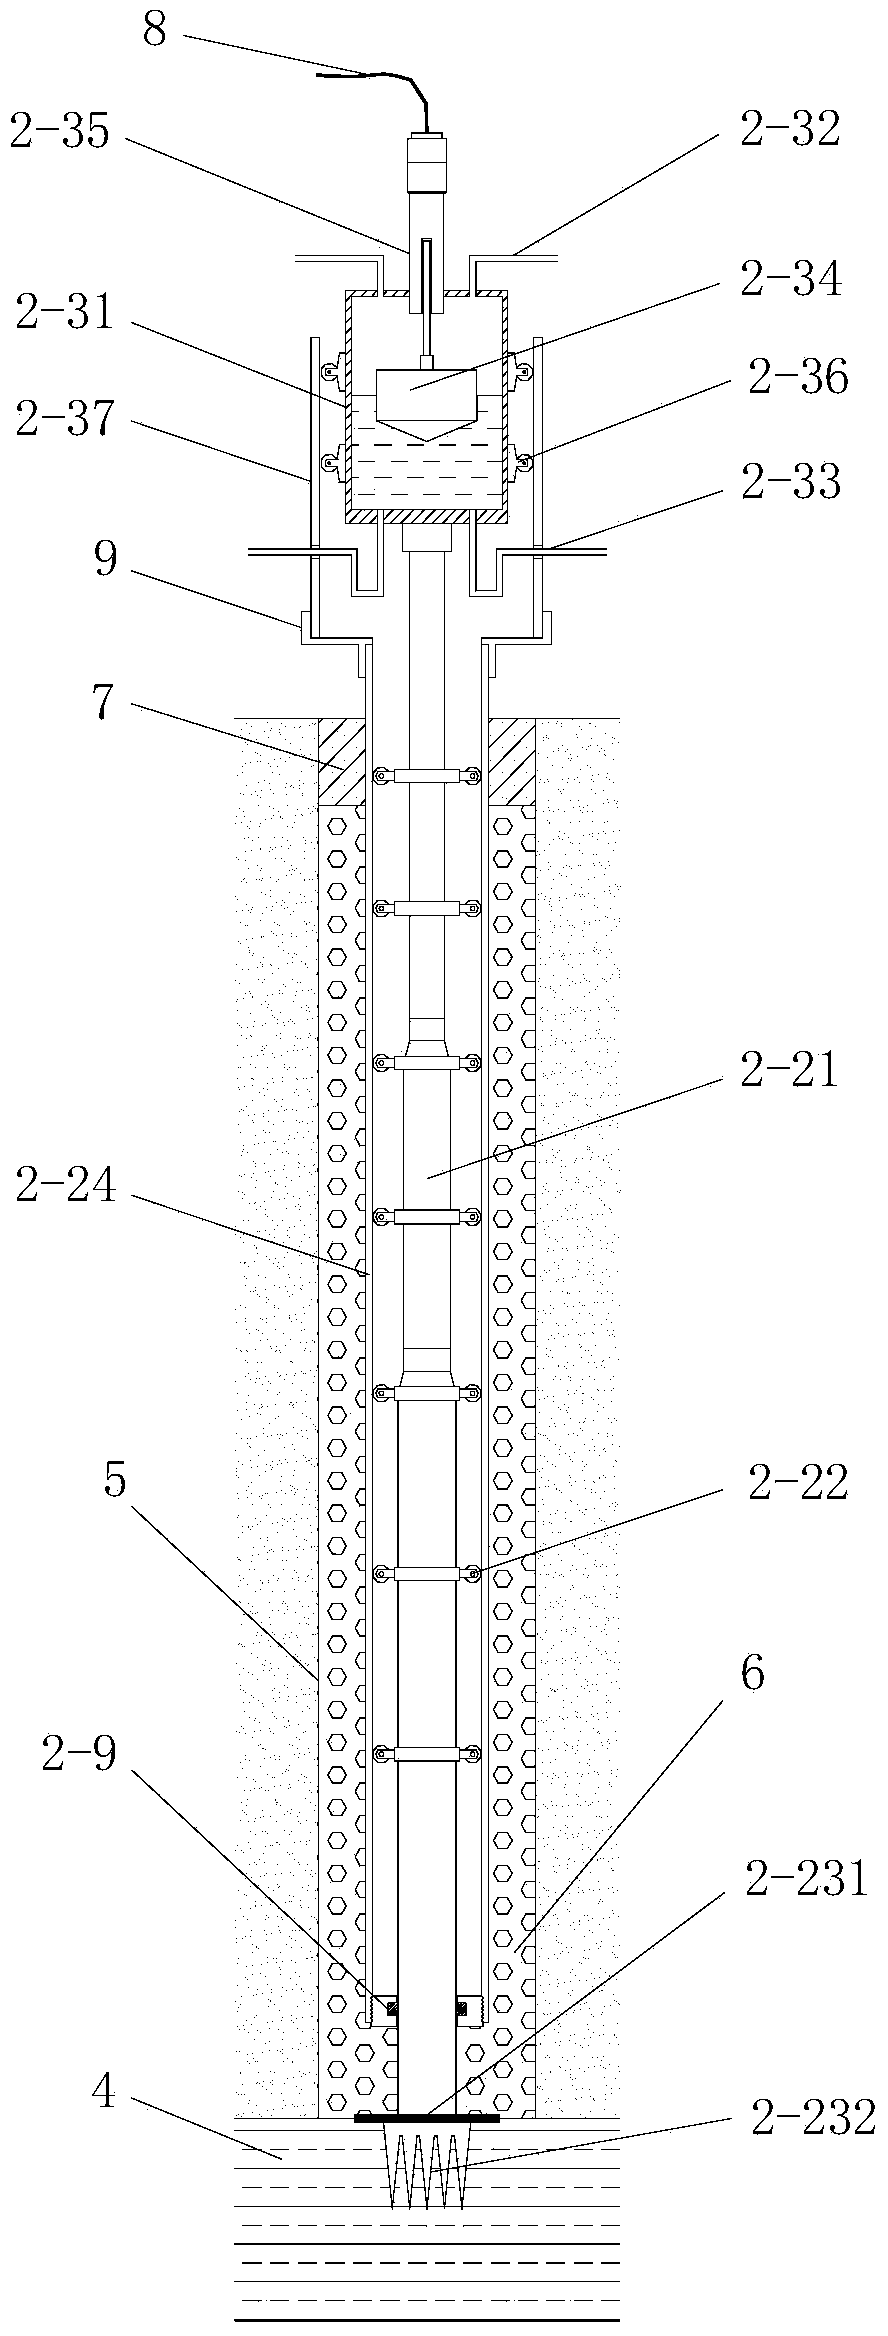 Satellite positioning and static leveling-based layered settlement monitoring system and method